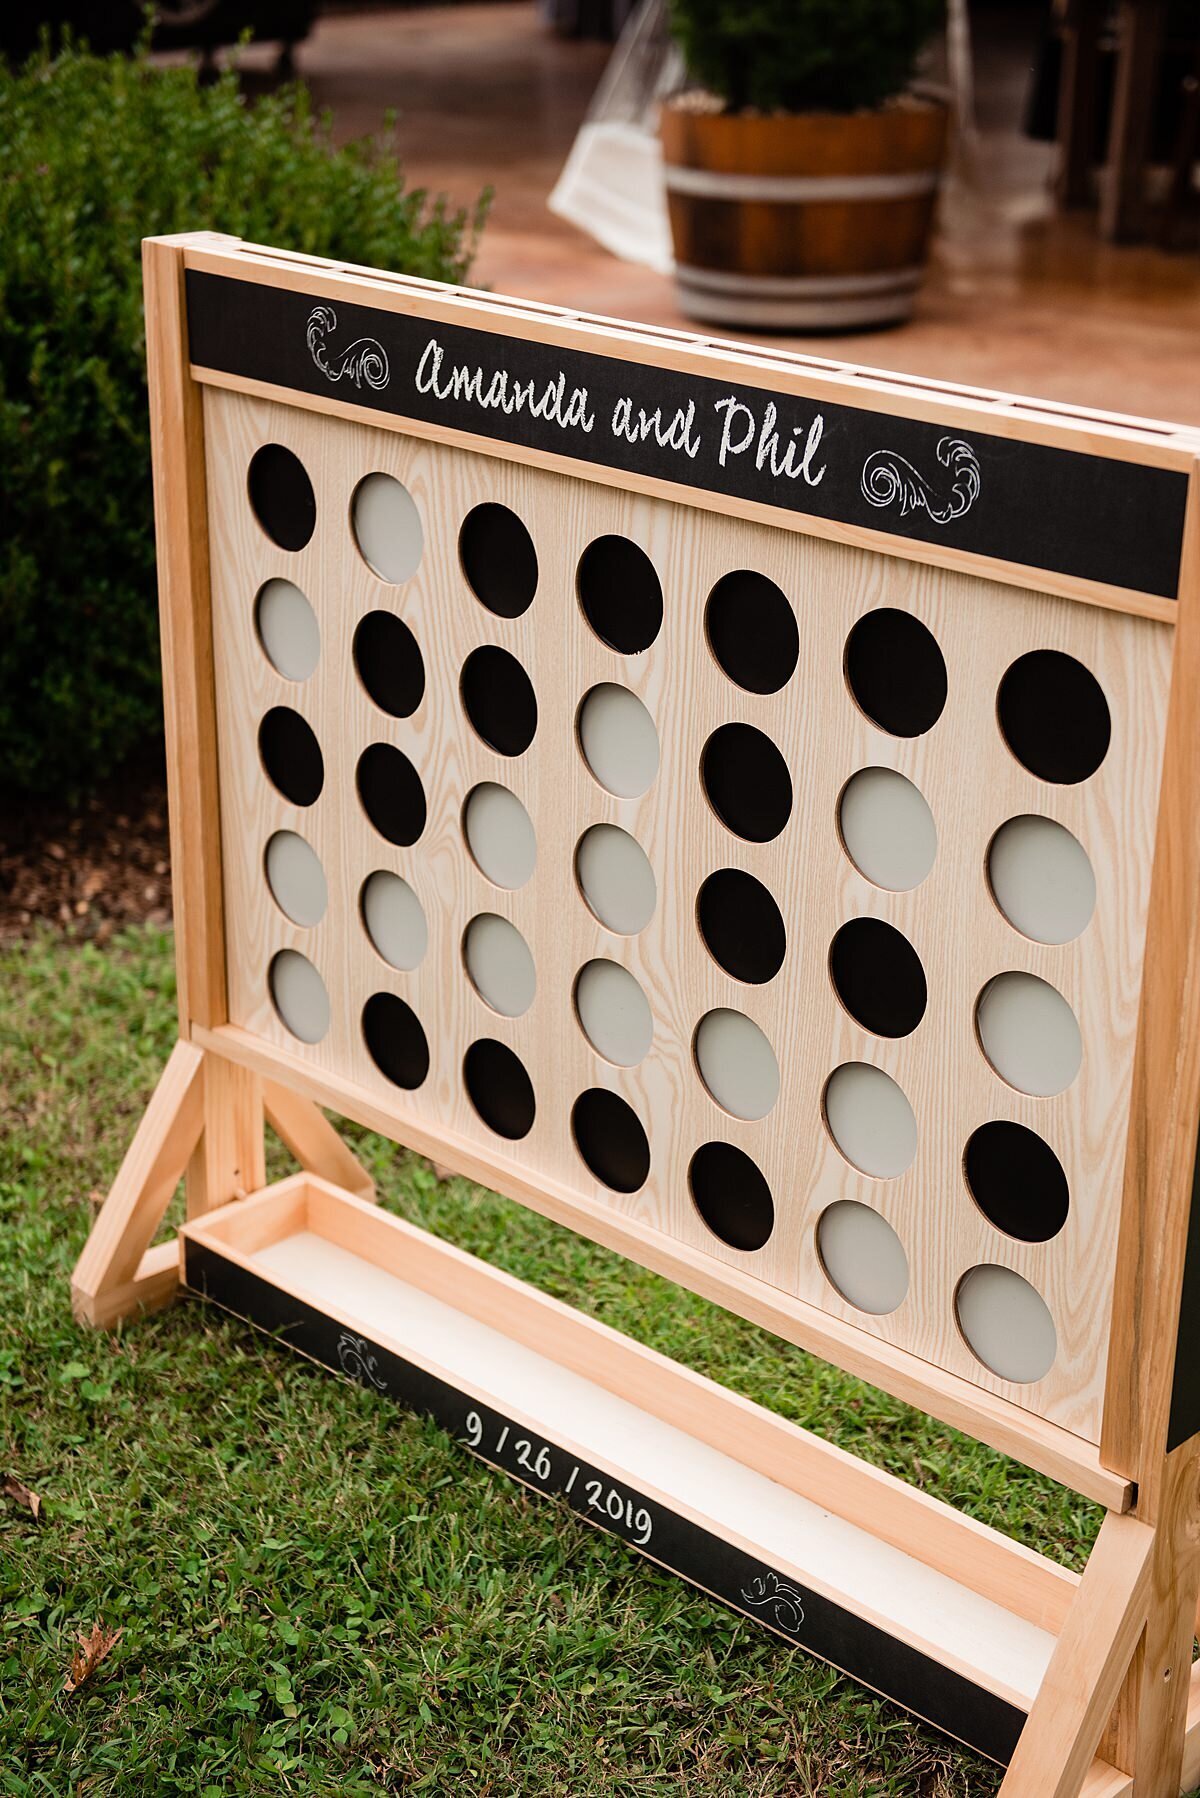 Giant connect four wedding lawn game in a light wood frame with white and black checkers personalized.